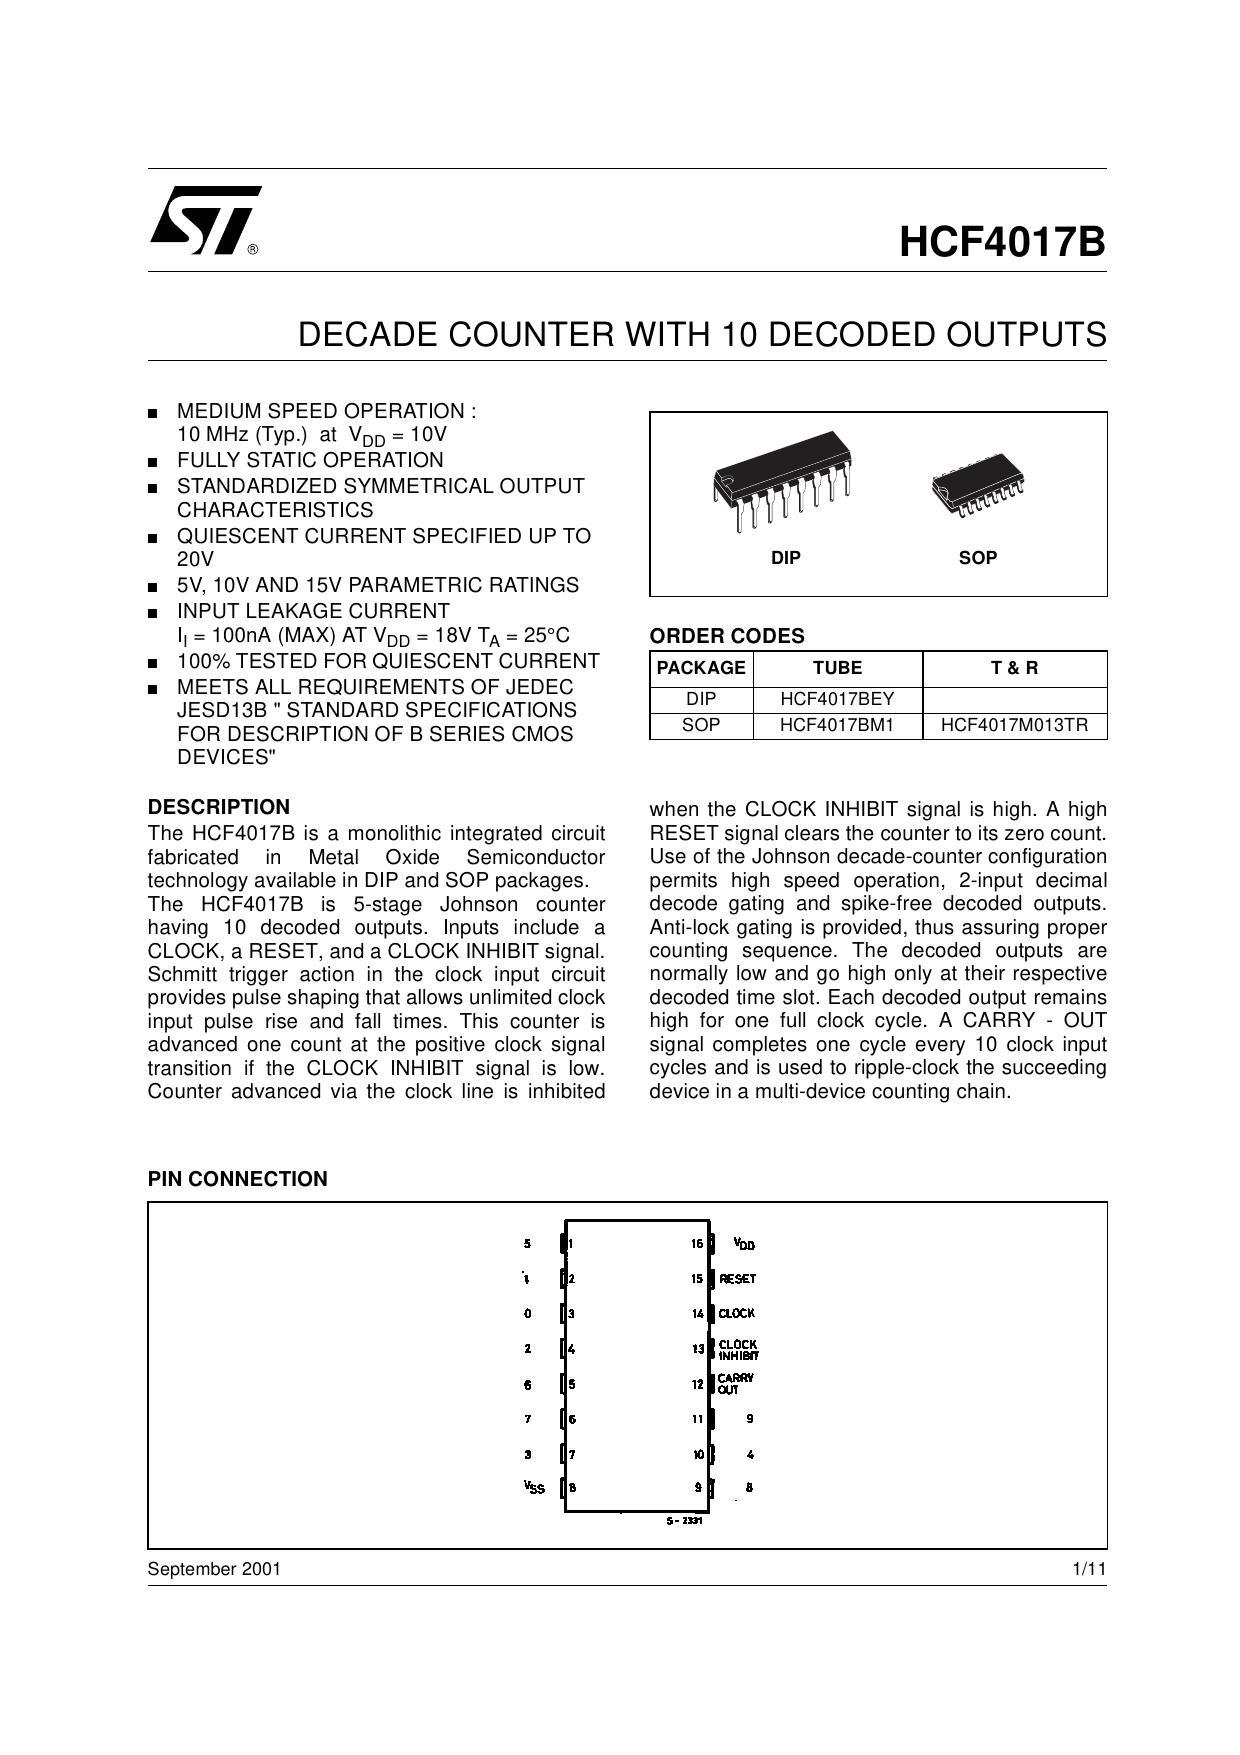 hcf4017b---decade-counter-with-10-decoded-outputs.pdf